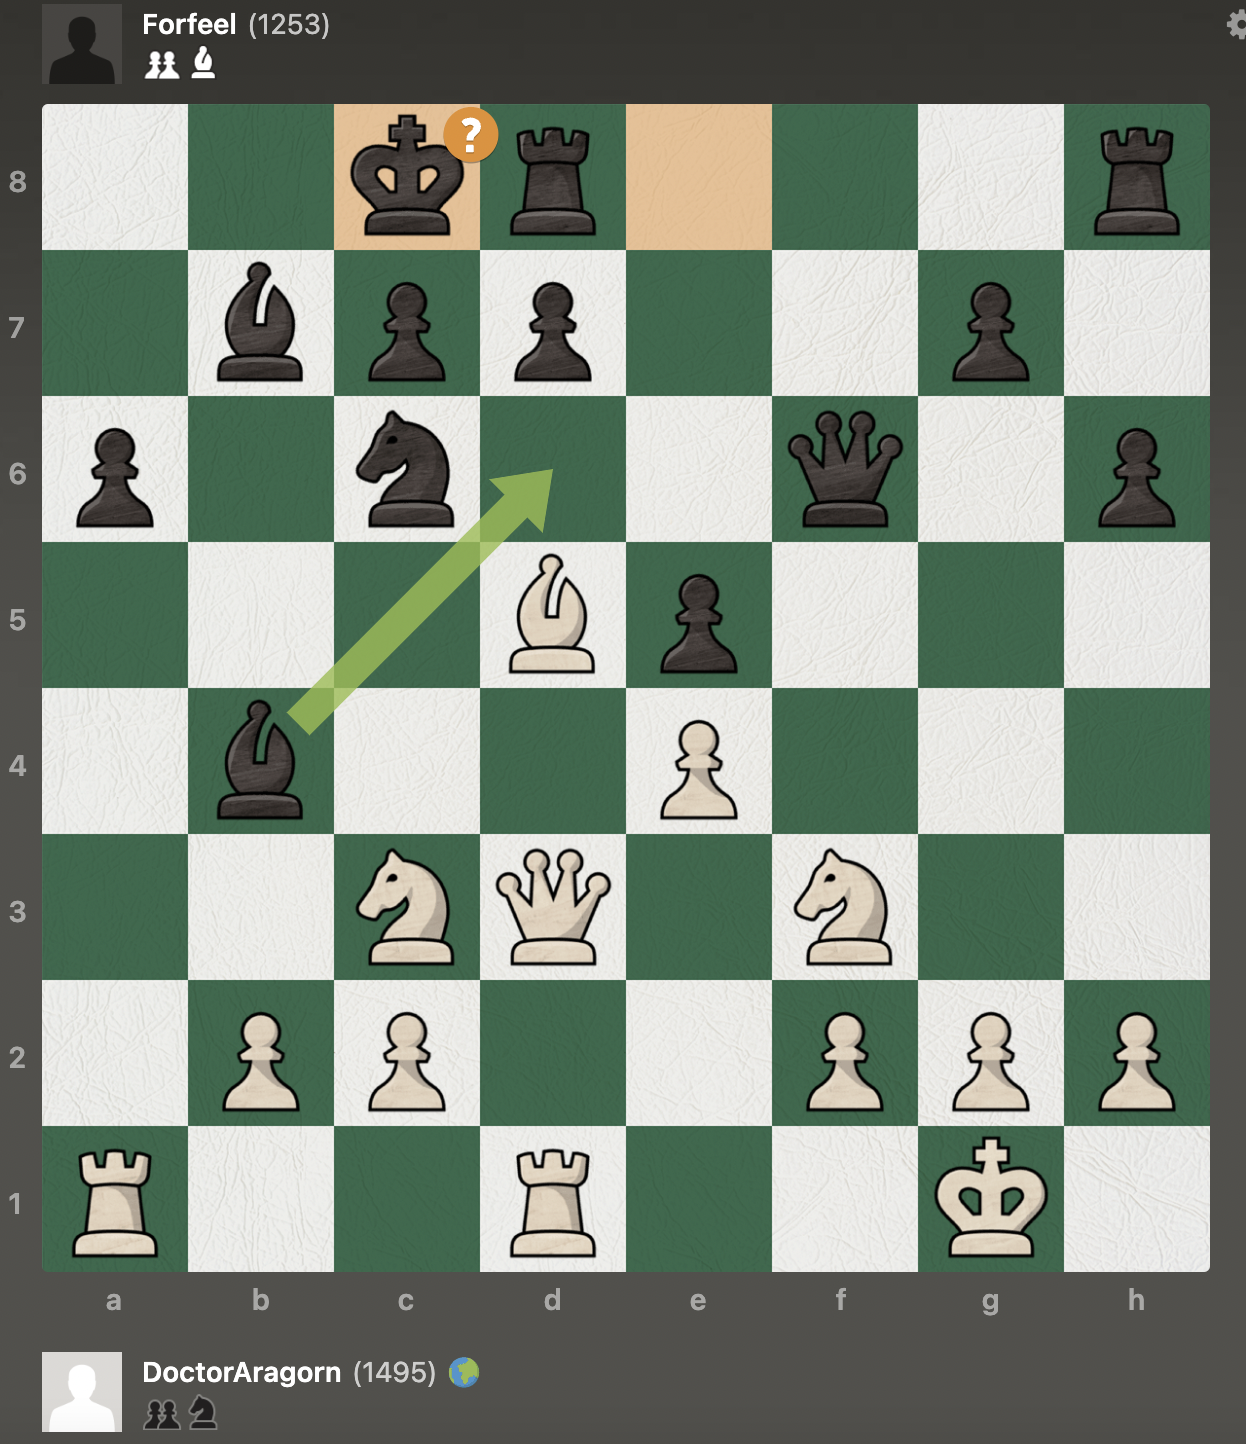 I want to move one of my rooks to defend my pawn on c6. Why one is